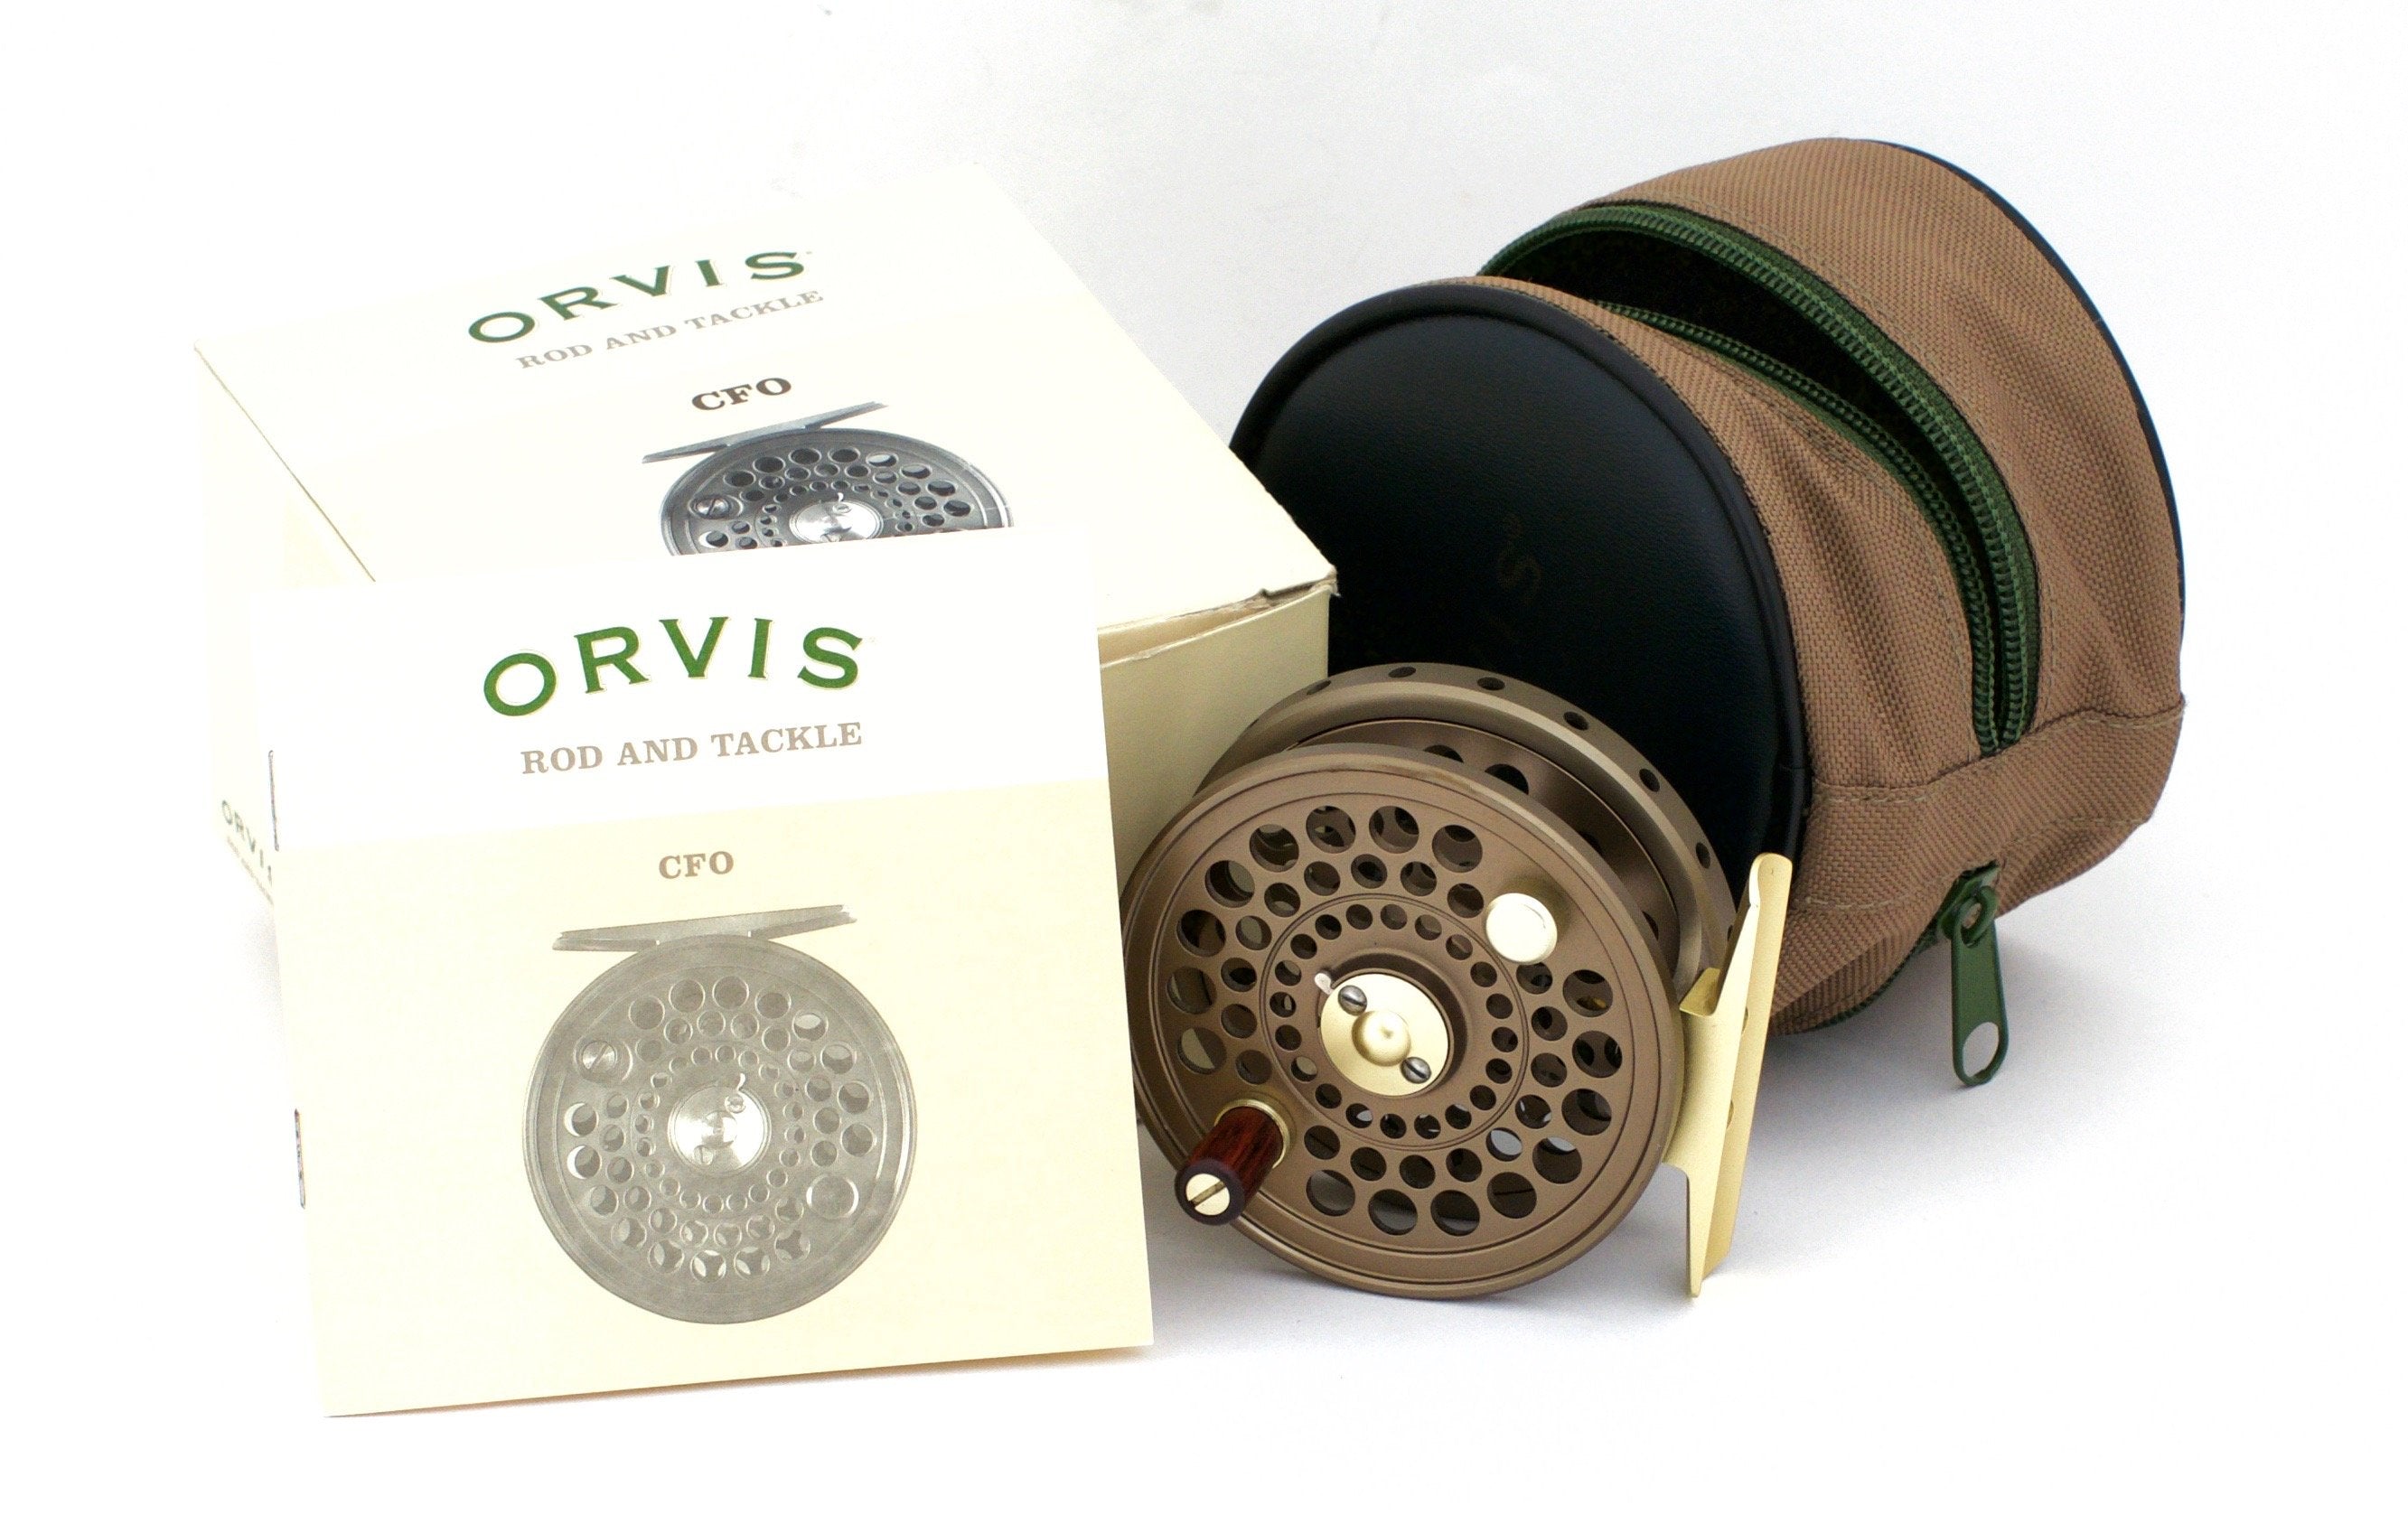 Rare Orvis Cfo 3 Disc Fly Reel C.F.O. With Case, Engine In Good Condition,  Limit